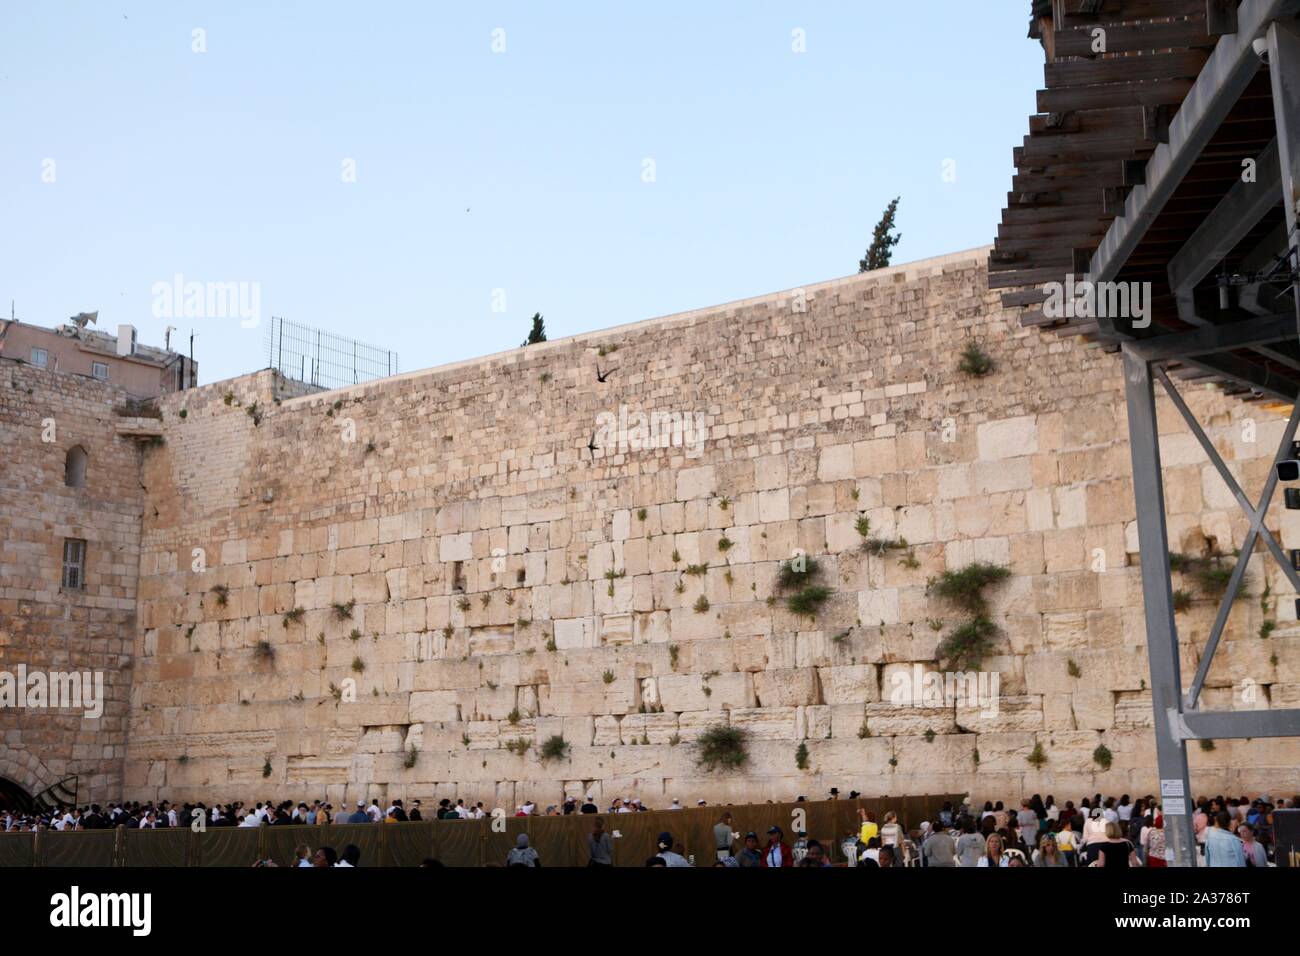 Worshipers at the Western Wall in Jerusalem, Israel. The wall is one of the holiest sites in Judaism except for the Temple Mount itself. Stock Photo